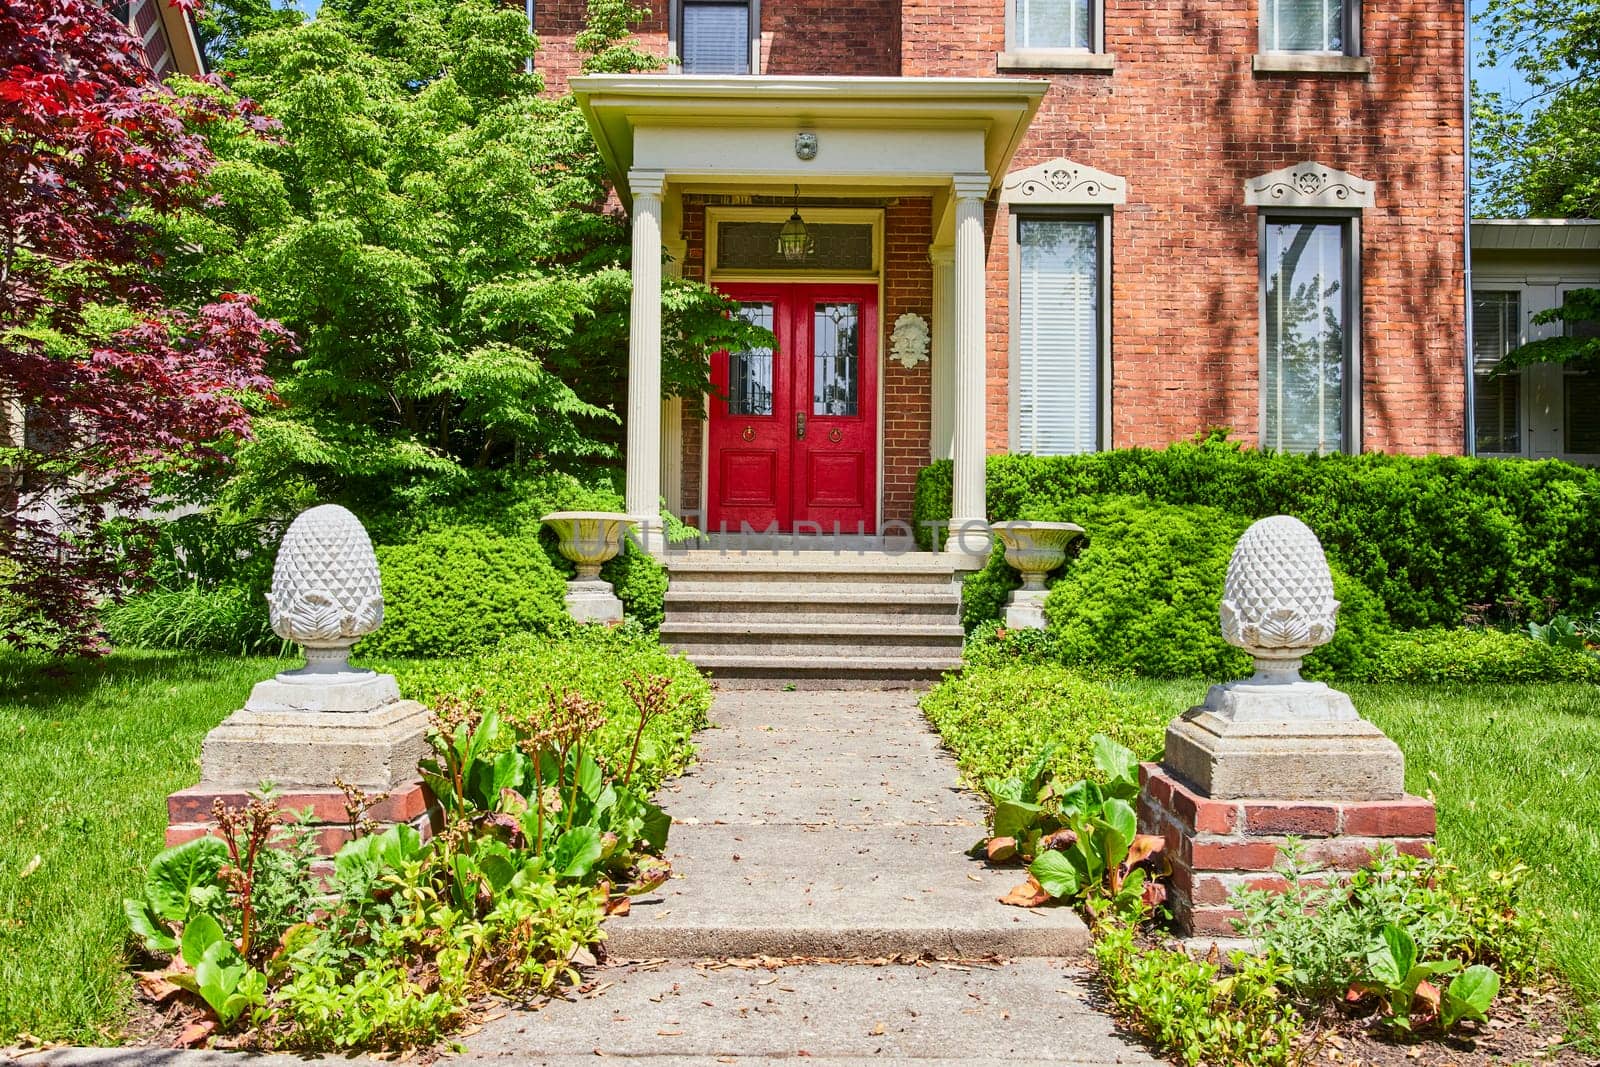 Sunny day at a classic brick home in Fort Wayne with vibrant red doors and lush greenery, embodying warmth and welcome.